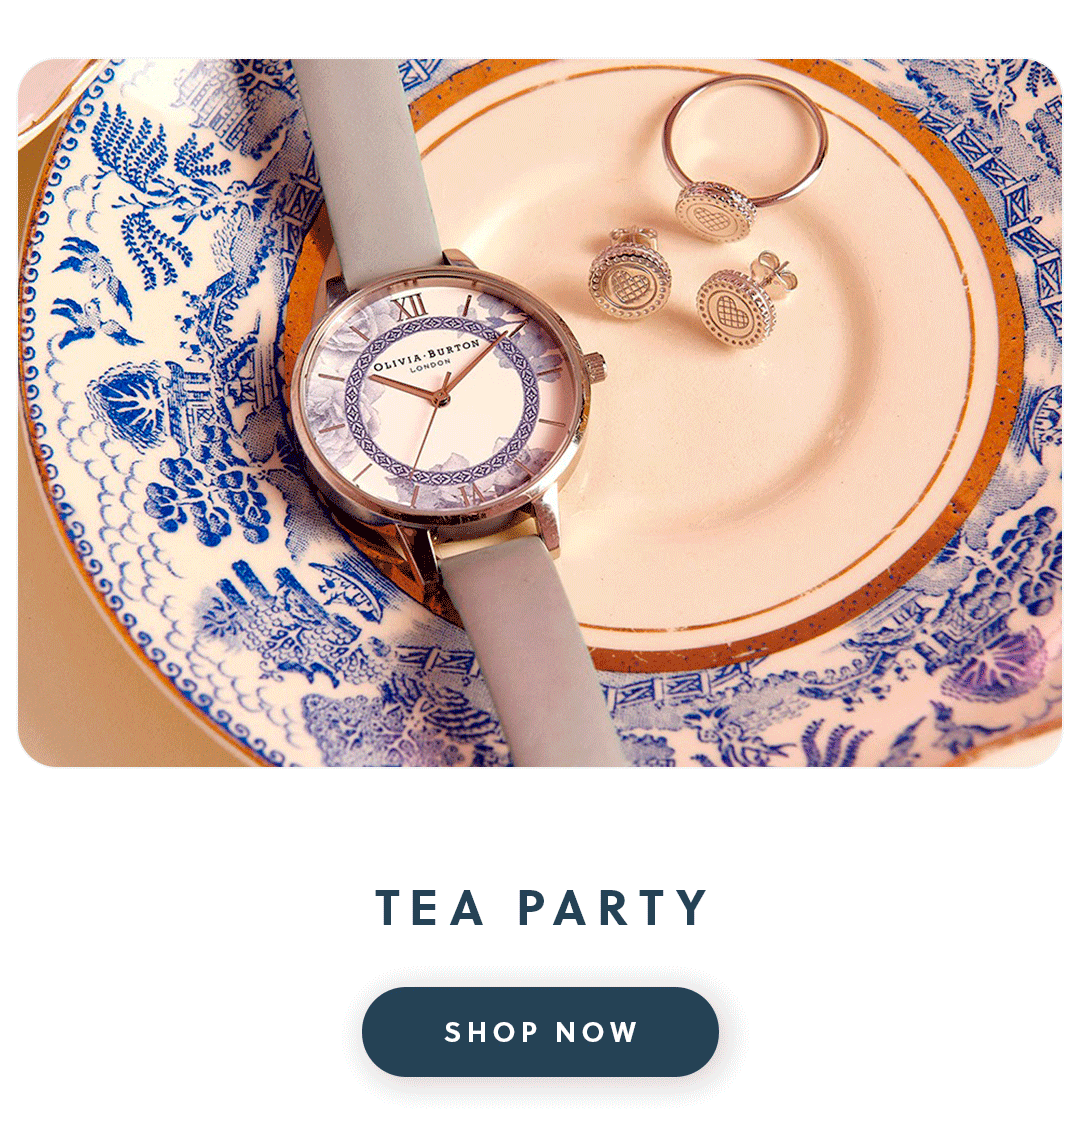 An Olivia Burton watch and jewellery on a china plate with text tea part shop now